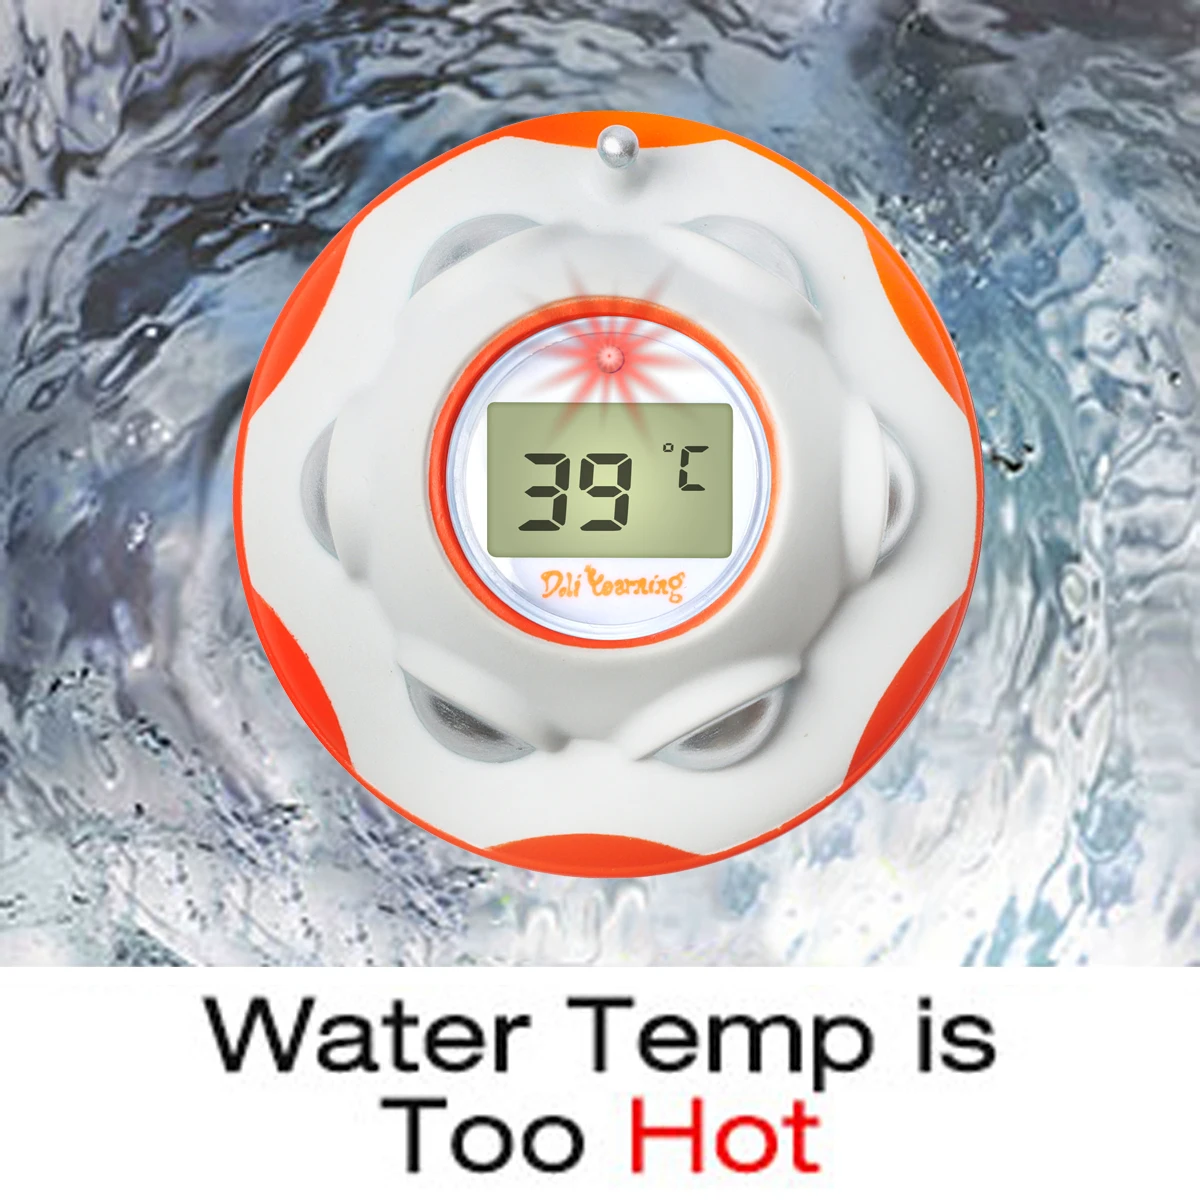 Bathtub Water Temperature Meter Babies Bath Thermometer Test Sensor Baby  Care Accessories for Toddlers Infants Newborns - AliExpress